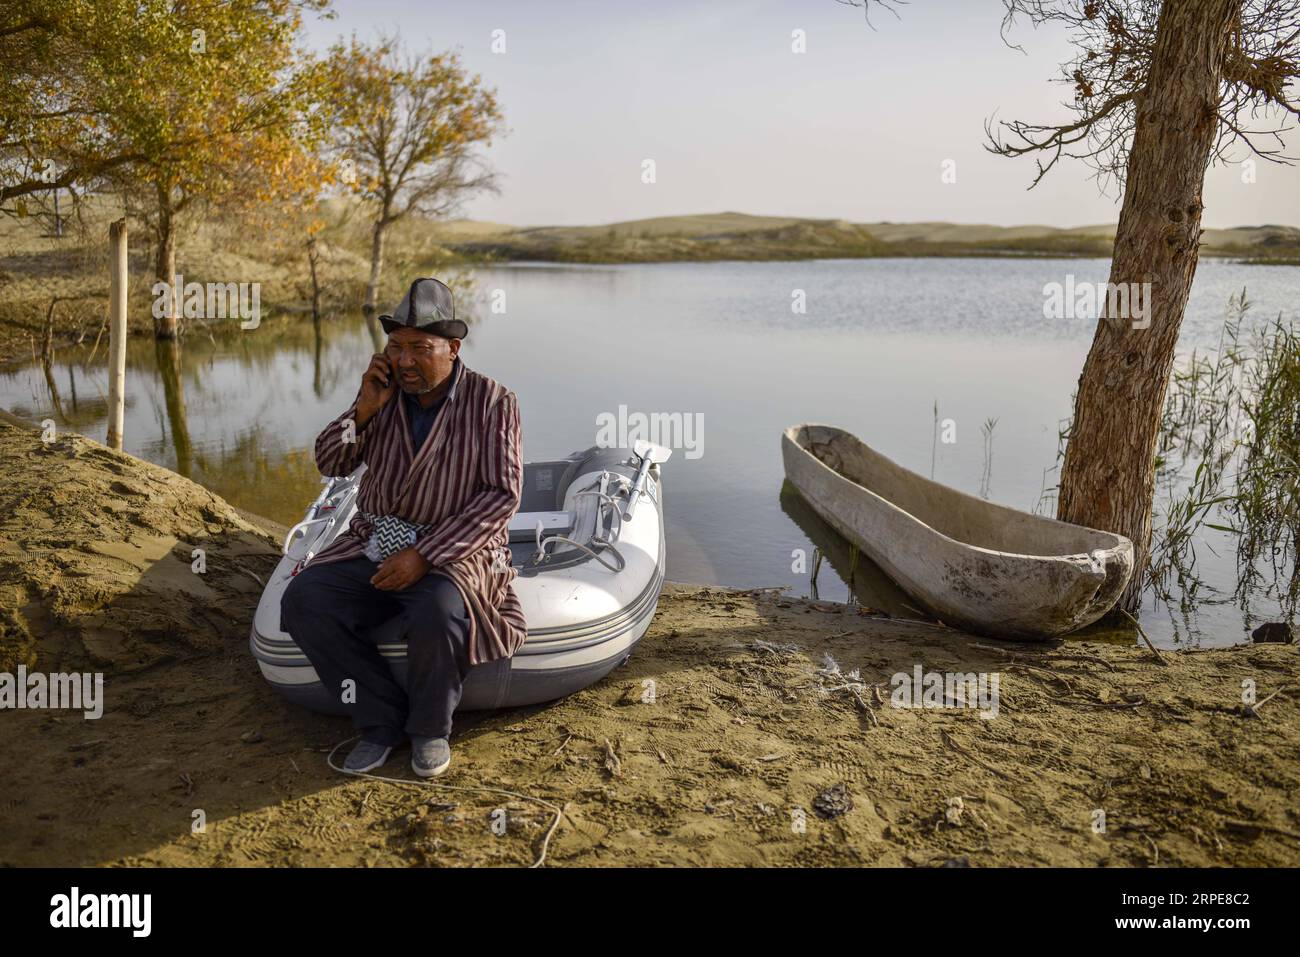 (190821) -- YULI, Aug. 21, 2019 -- Amudun Abudu answers his cellphone in Lop Nur People Village in Yuli County, northwest China s Xinjiang Uygur Autonomous Region, Oct. 16, 2018. Lop Nur People Village is located in Yuli County, where Tarim River flows through the deserts with populus euphratica forests reflection on the shimmering waves. Amudun Abudu, a 61-year old typical Lop Nur villager, works in local tourism industry. With the changes of the times, many Lop Nur people have various options for a living, yet he insists on the tradition of fishing in rivers and lakes. Not only does he make Stock Photo